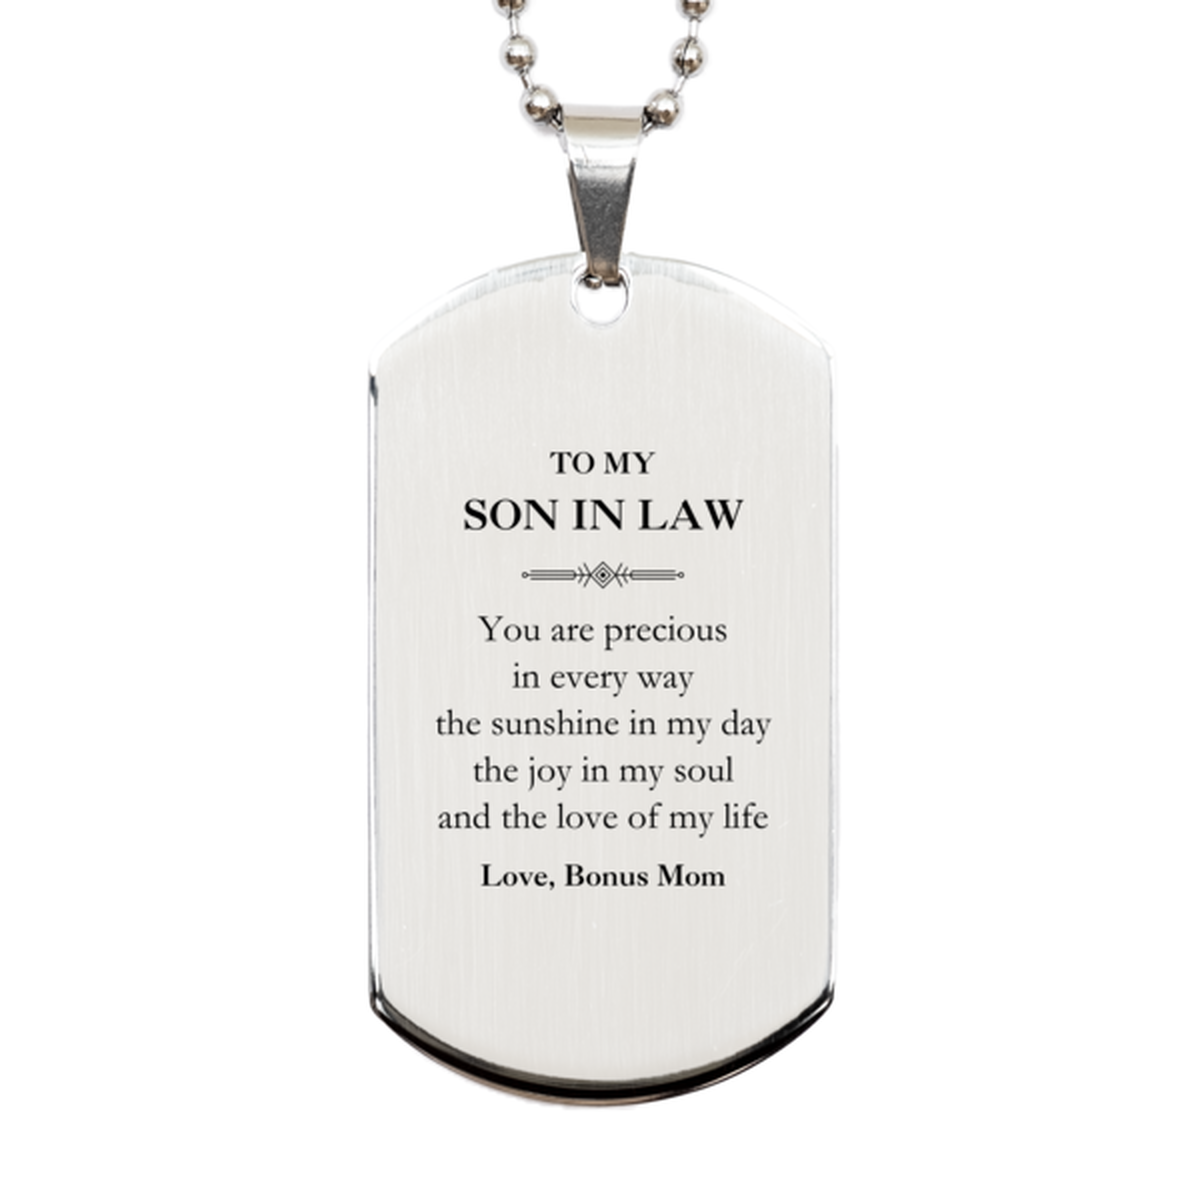 Graduation Gifts for Son In Law Silver Dog Tag Present from Bonus Mom, Christmas Son In Law Birthday Gifts Son In Law You are precious in every way the sunshine in my day. Love, Bonus Mom